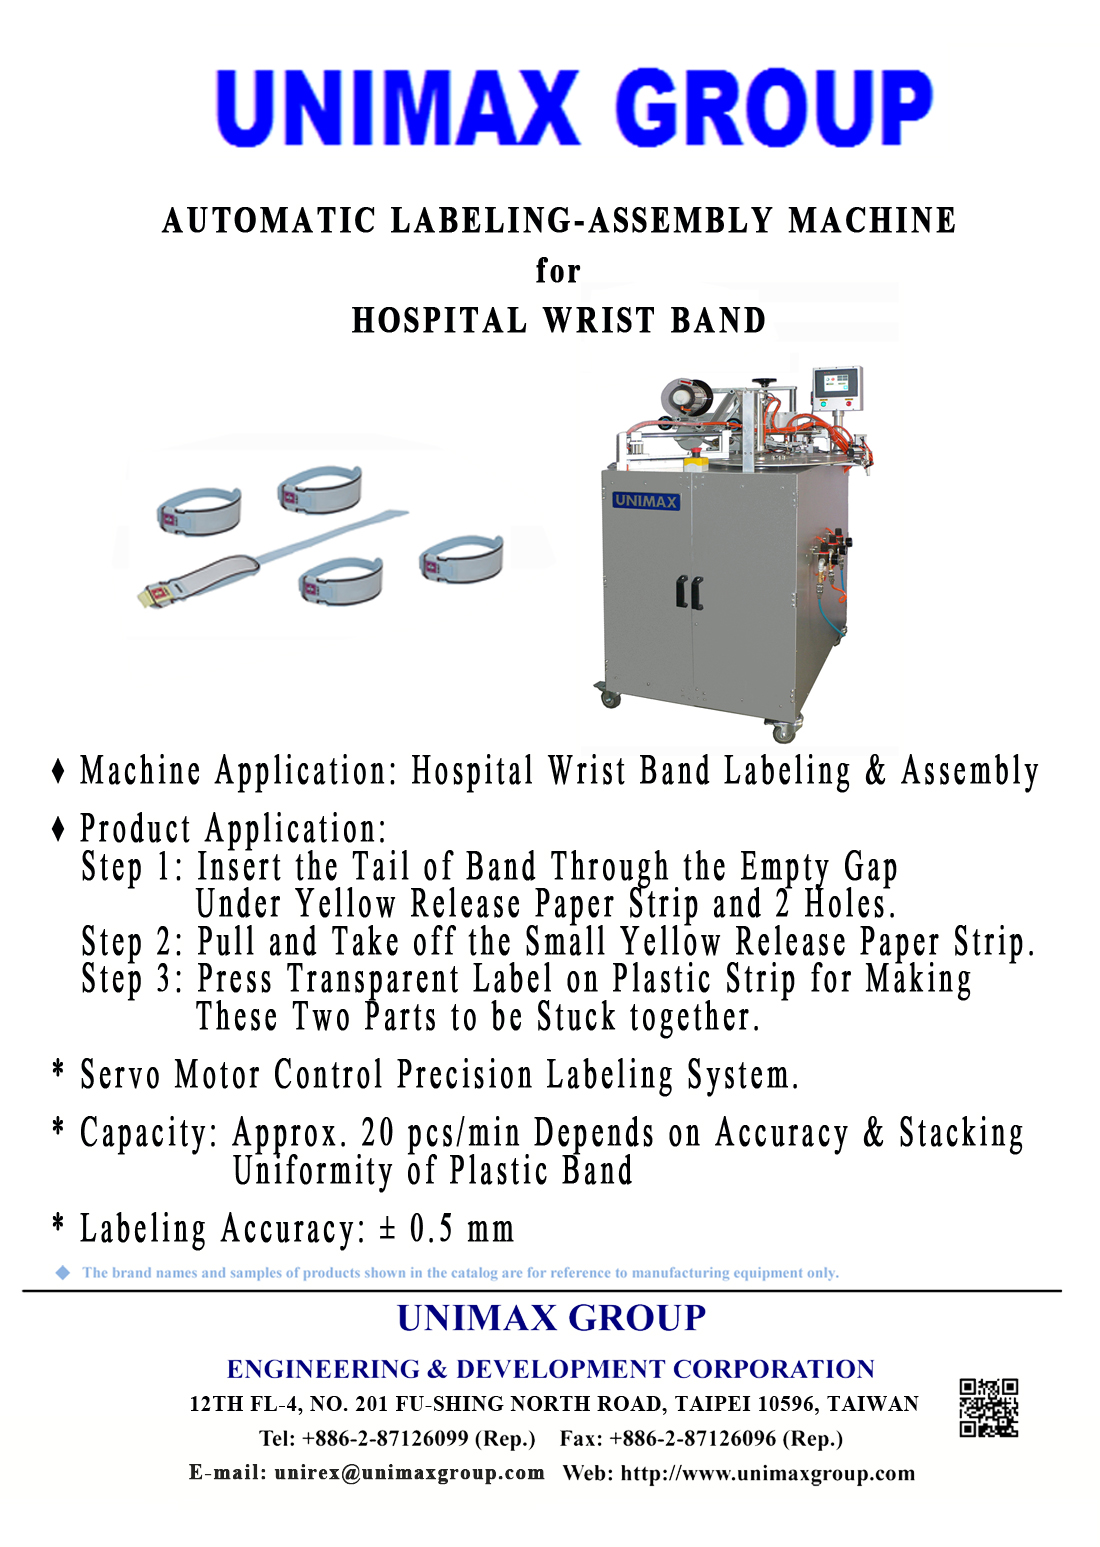 Automatic Labeling - Assembly Machine for Hospital Wrist Band